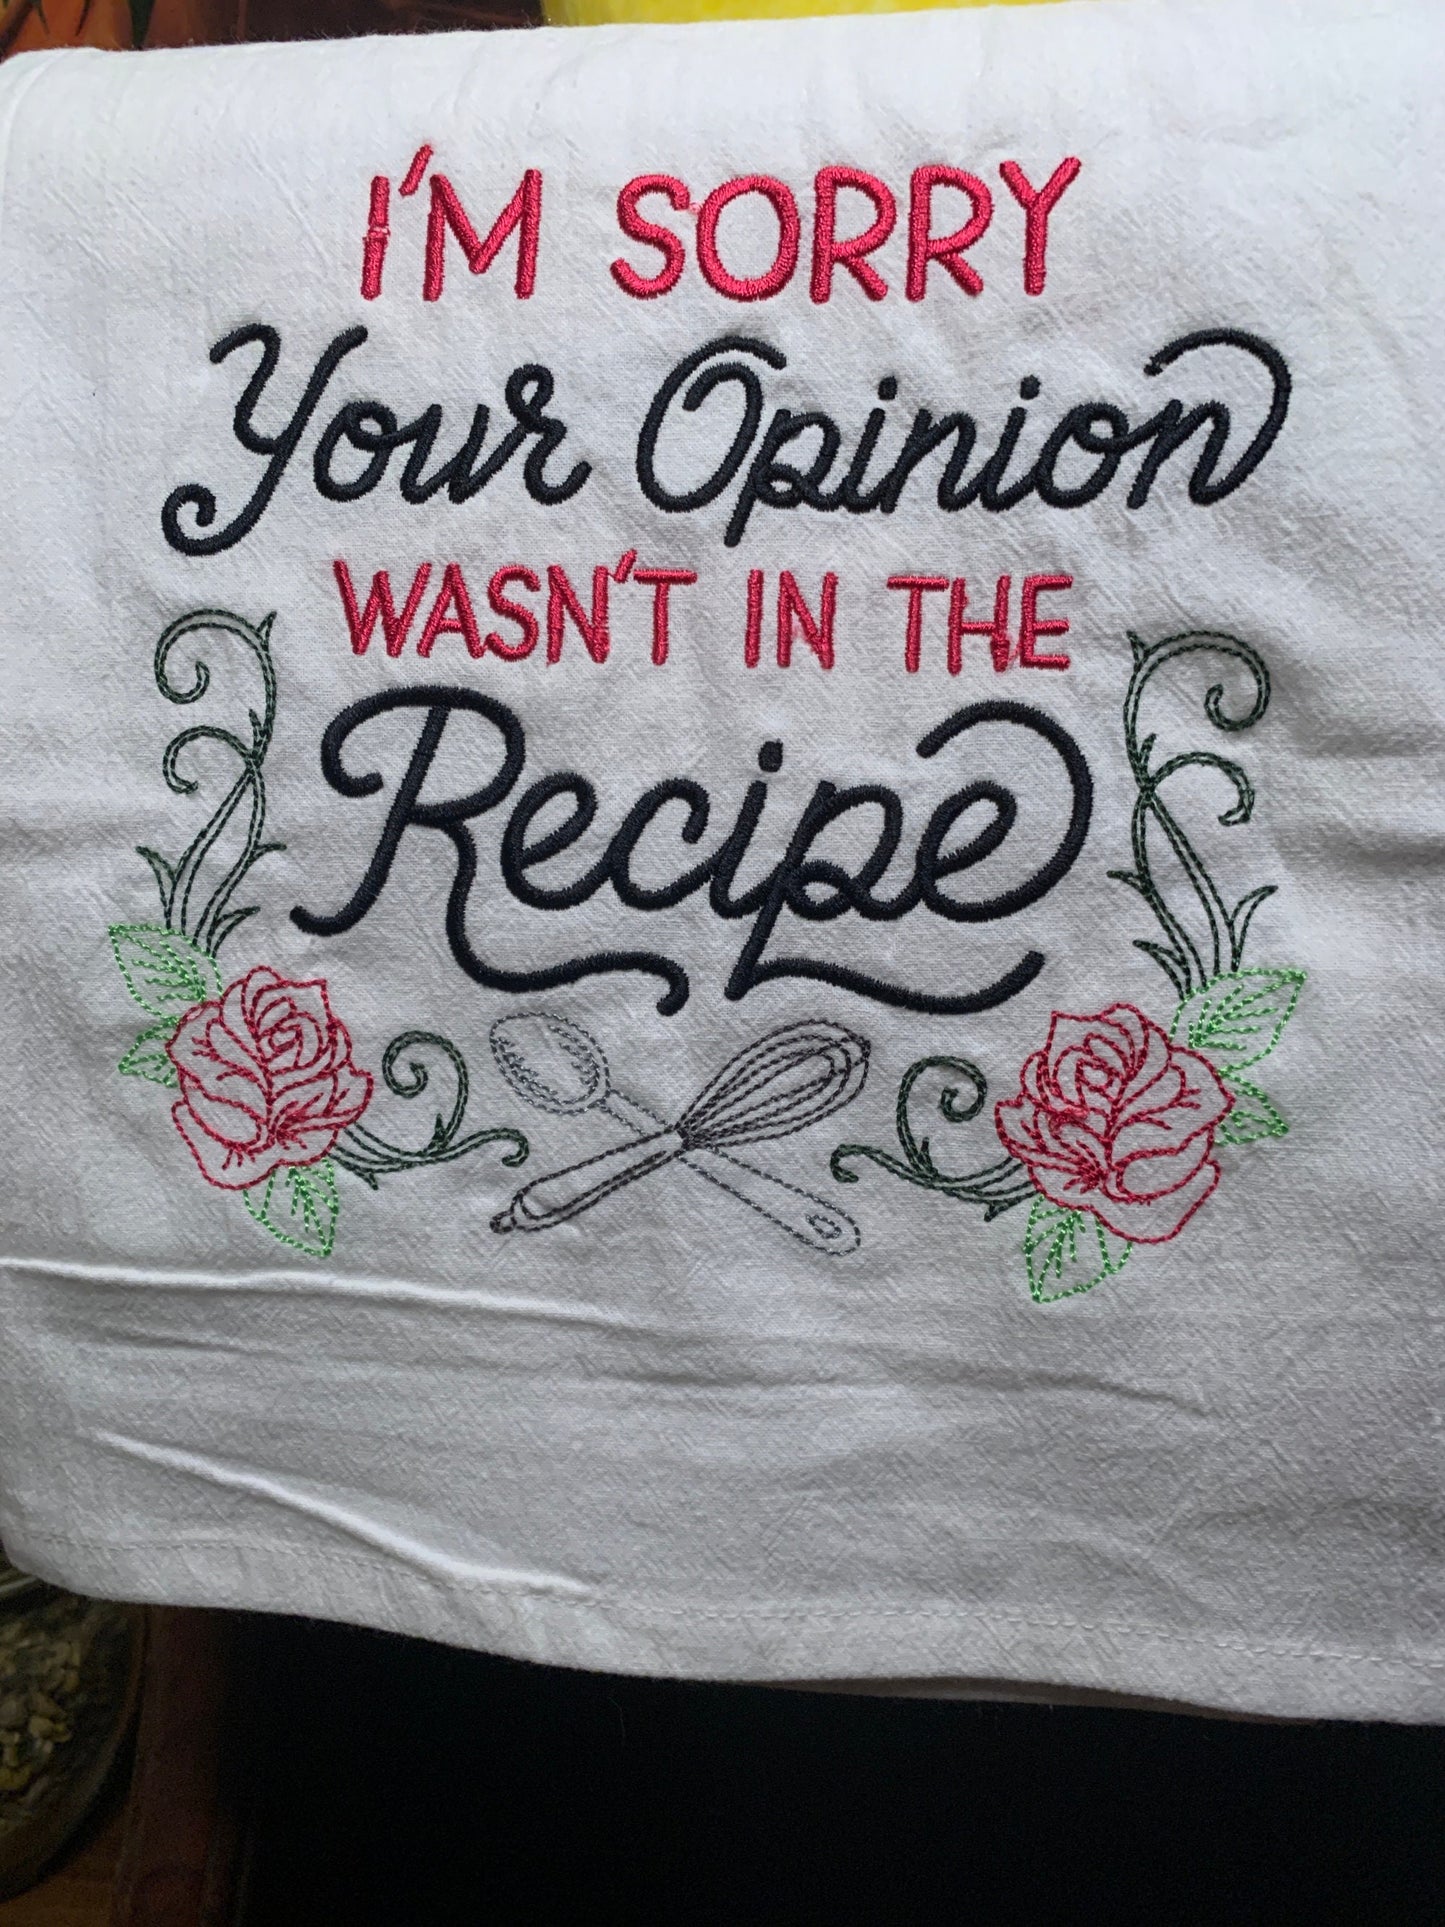 Embroidered Tea Towel "I'm Sorry, Your Opinion Wasn't in the Recipe"